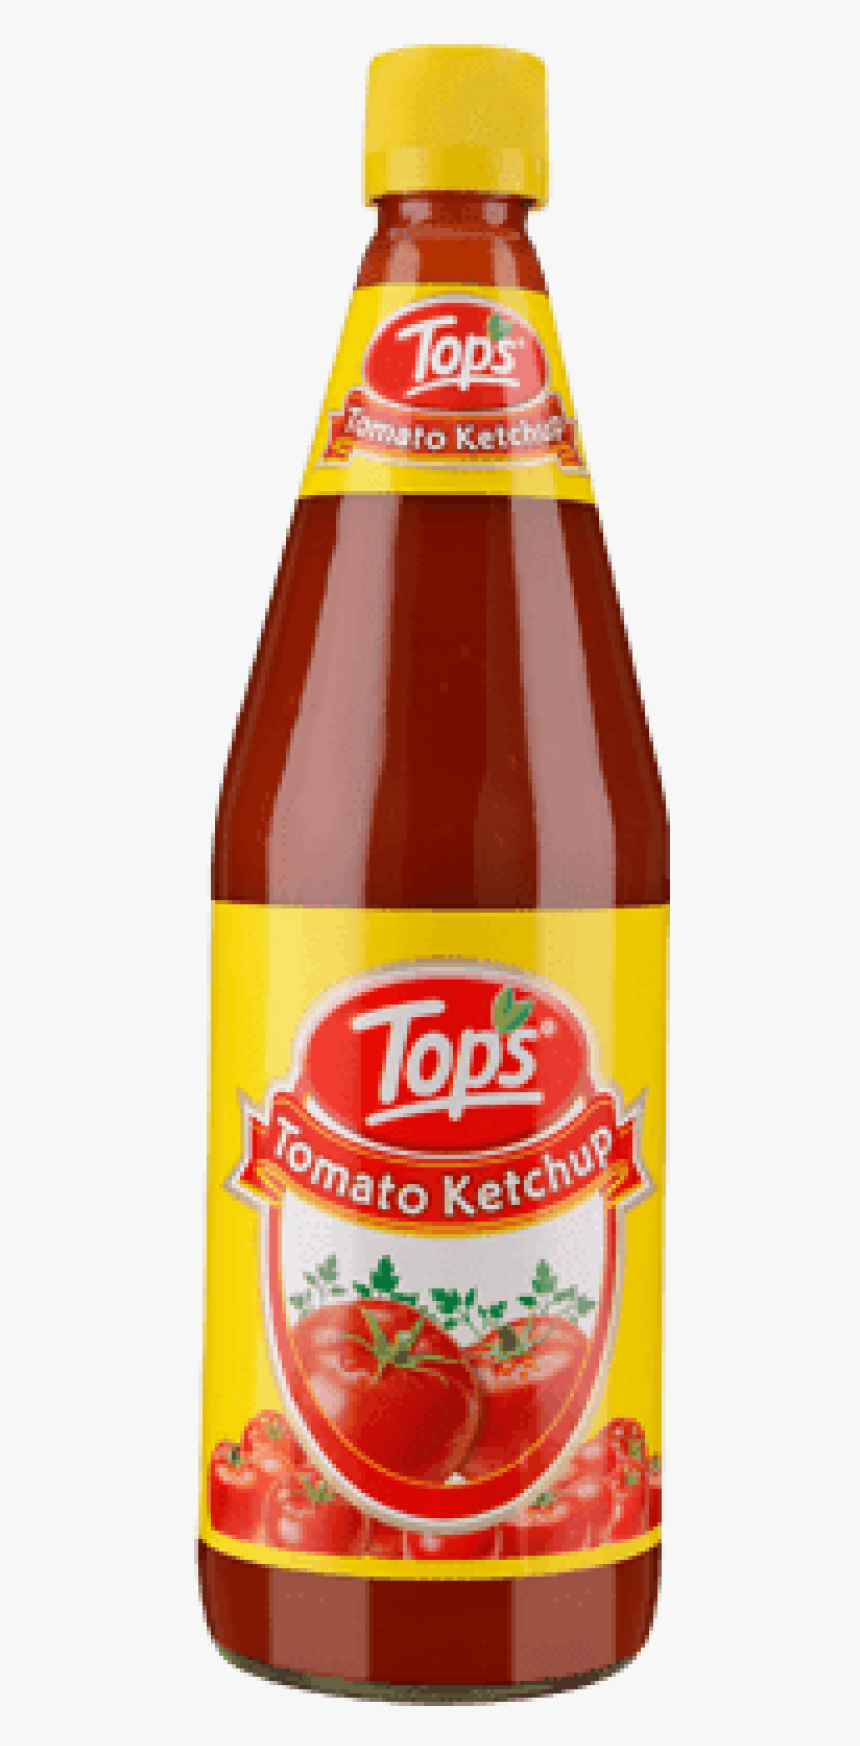 Free Png Download Tops Tomato Ketchup Png Images Background - Tops Tomato Ketchup 500g, Transparent Png, Free Download